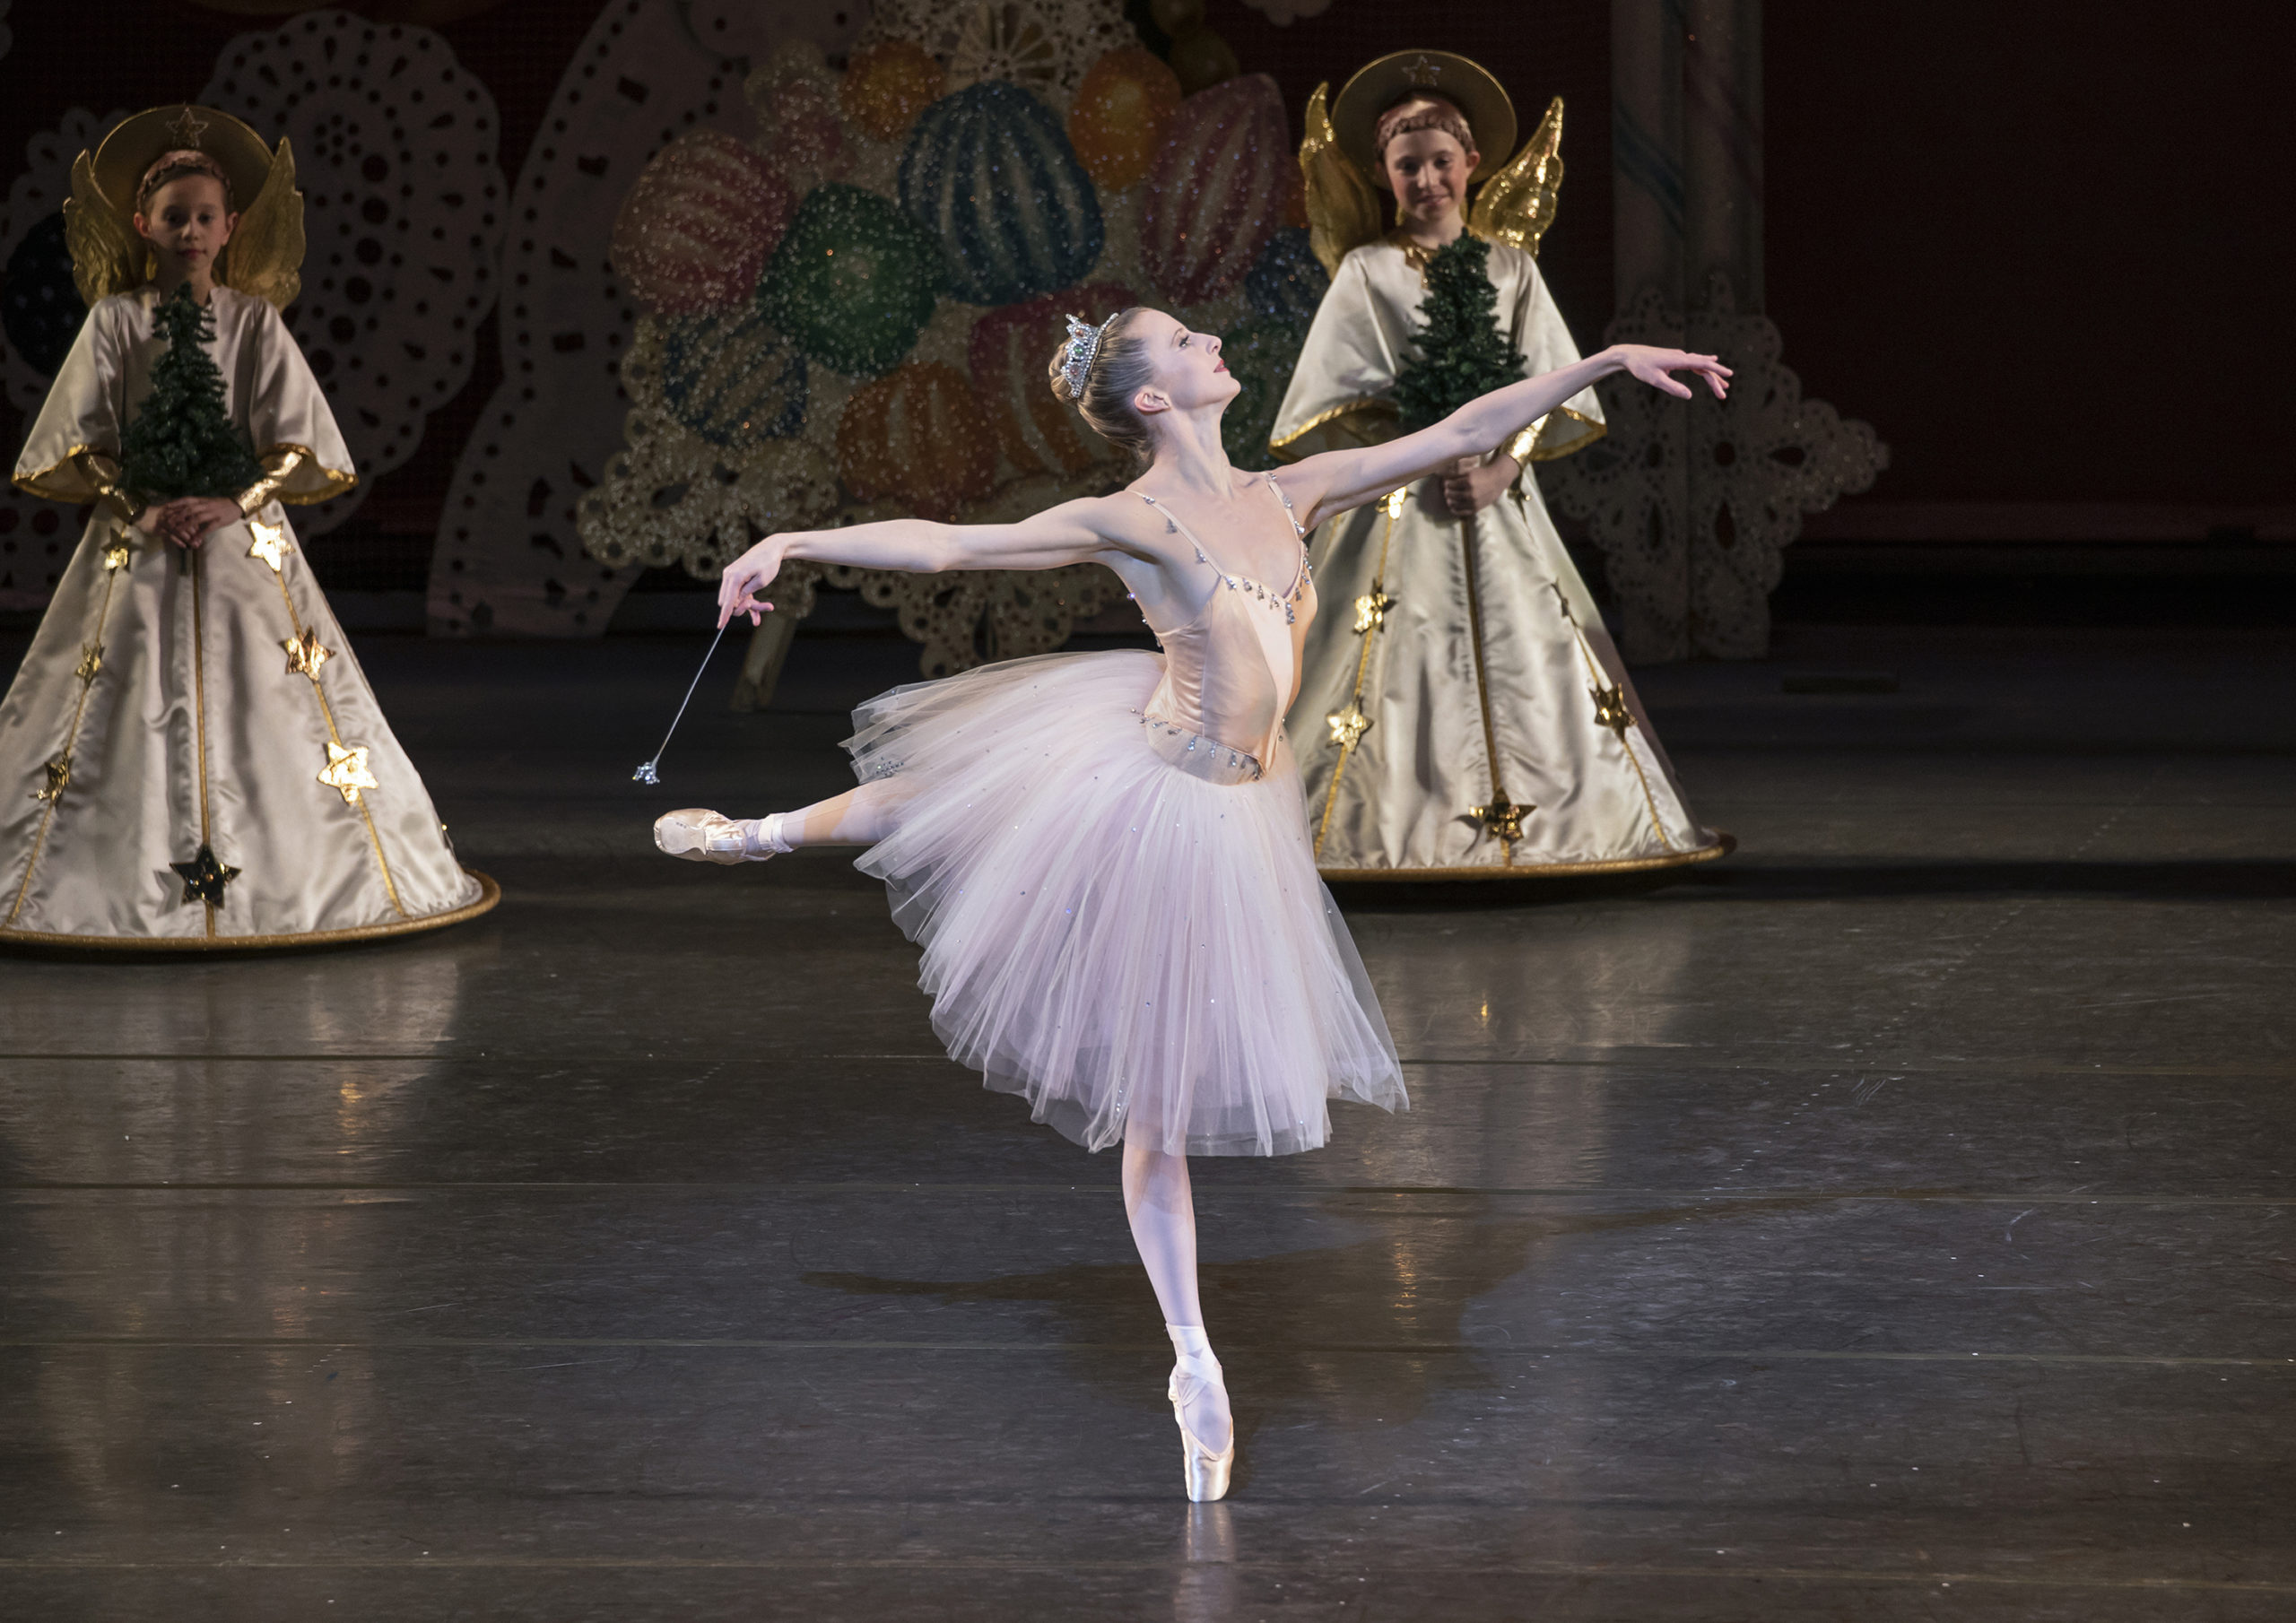 Sterling Hyltin, wearing a pink, knee-length tutu and sparkly tiara, performs the Nutcracker onstage. She is shown doing a piqué arabesque in fourth position on pointe towards stage left, and she holds a wand in her right hand. Behind her, small children costumed as angels hold small evergreen trees in their hands and watch.